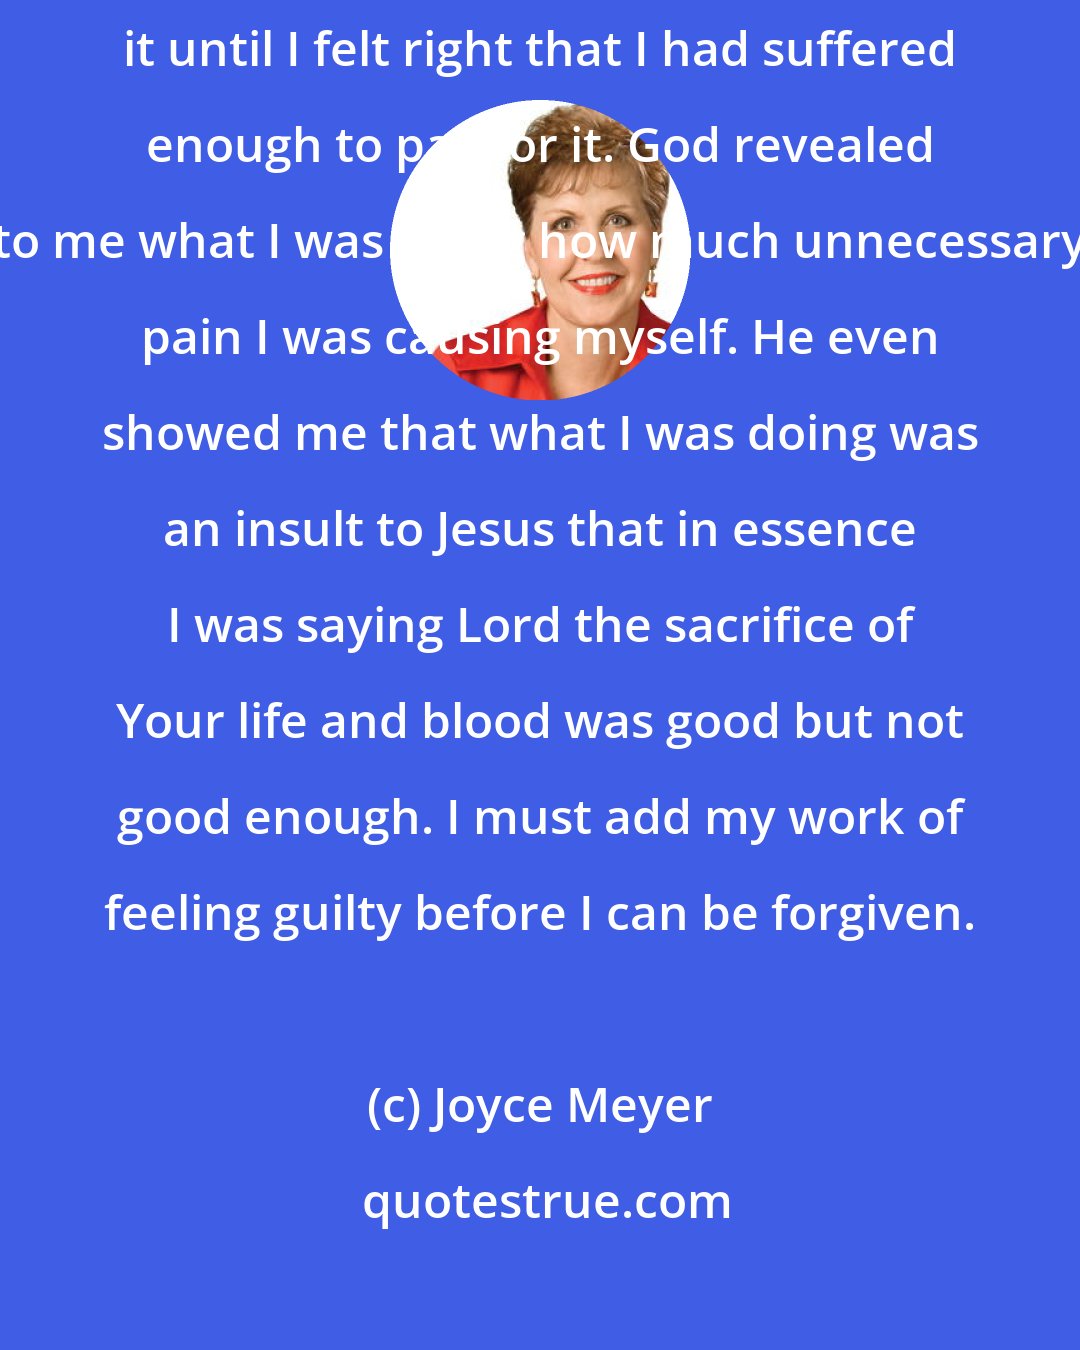 Joyce Meyer: I always asked for forgiveness for my sins right away but I never accepted it until I felt right that I had suffered enough to pay for it. God revealed to me what I was doing how much unnecessary pain I was causing myself. He even showed me that what I was doing was an insult to Jesus that in essence I was saying Lord the sacrifice of Your life and blood was good but not good enough. I must add my work of feeling guilty before I can be forgiven.